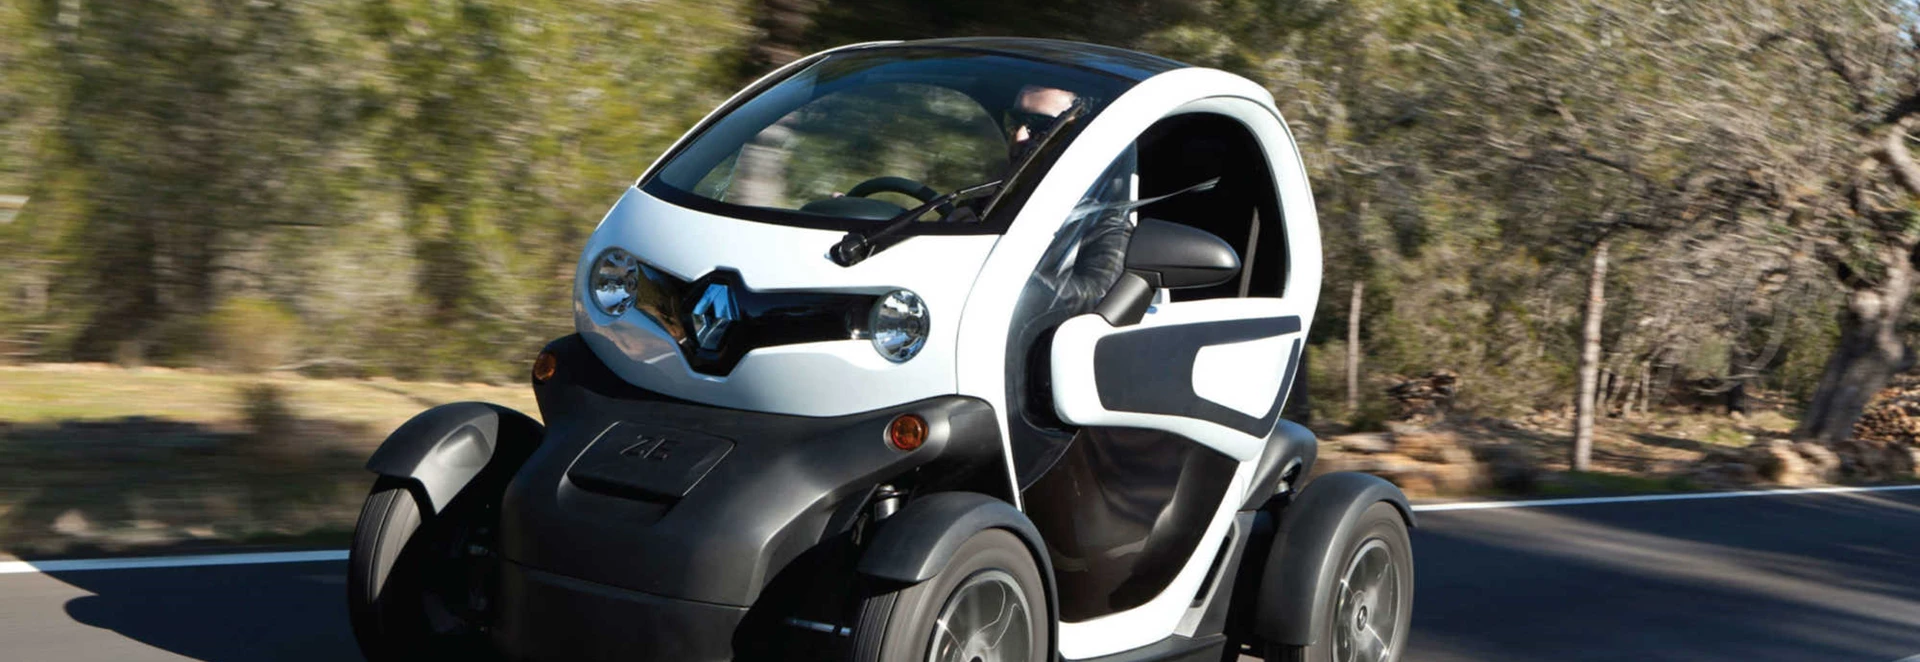 Renault Twizy review 